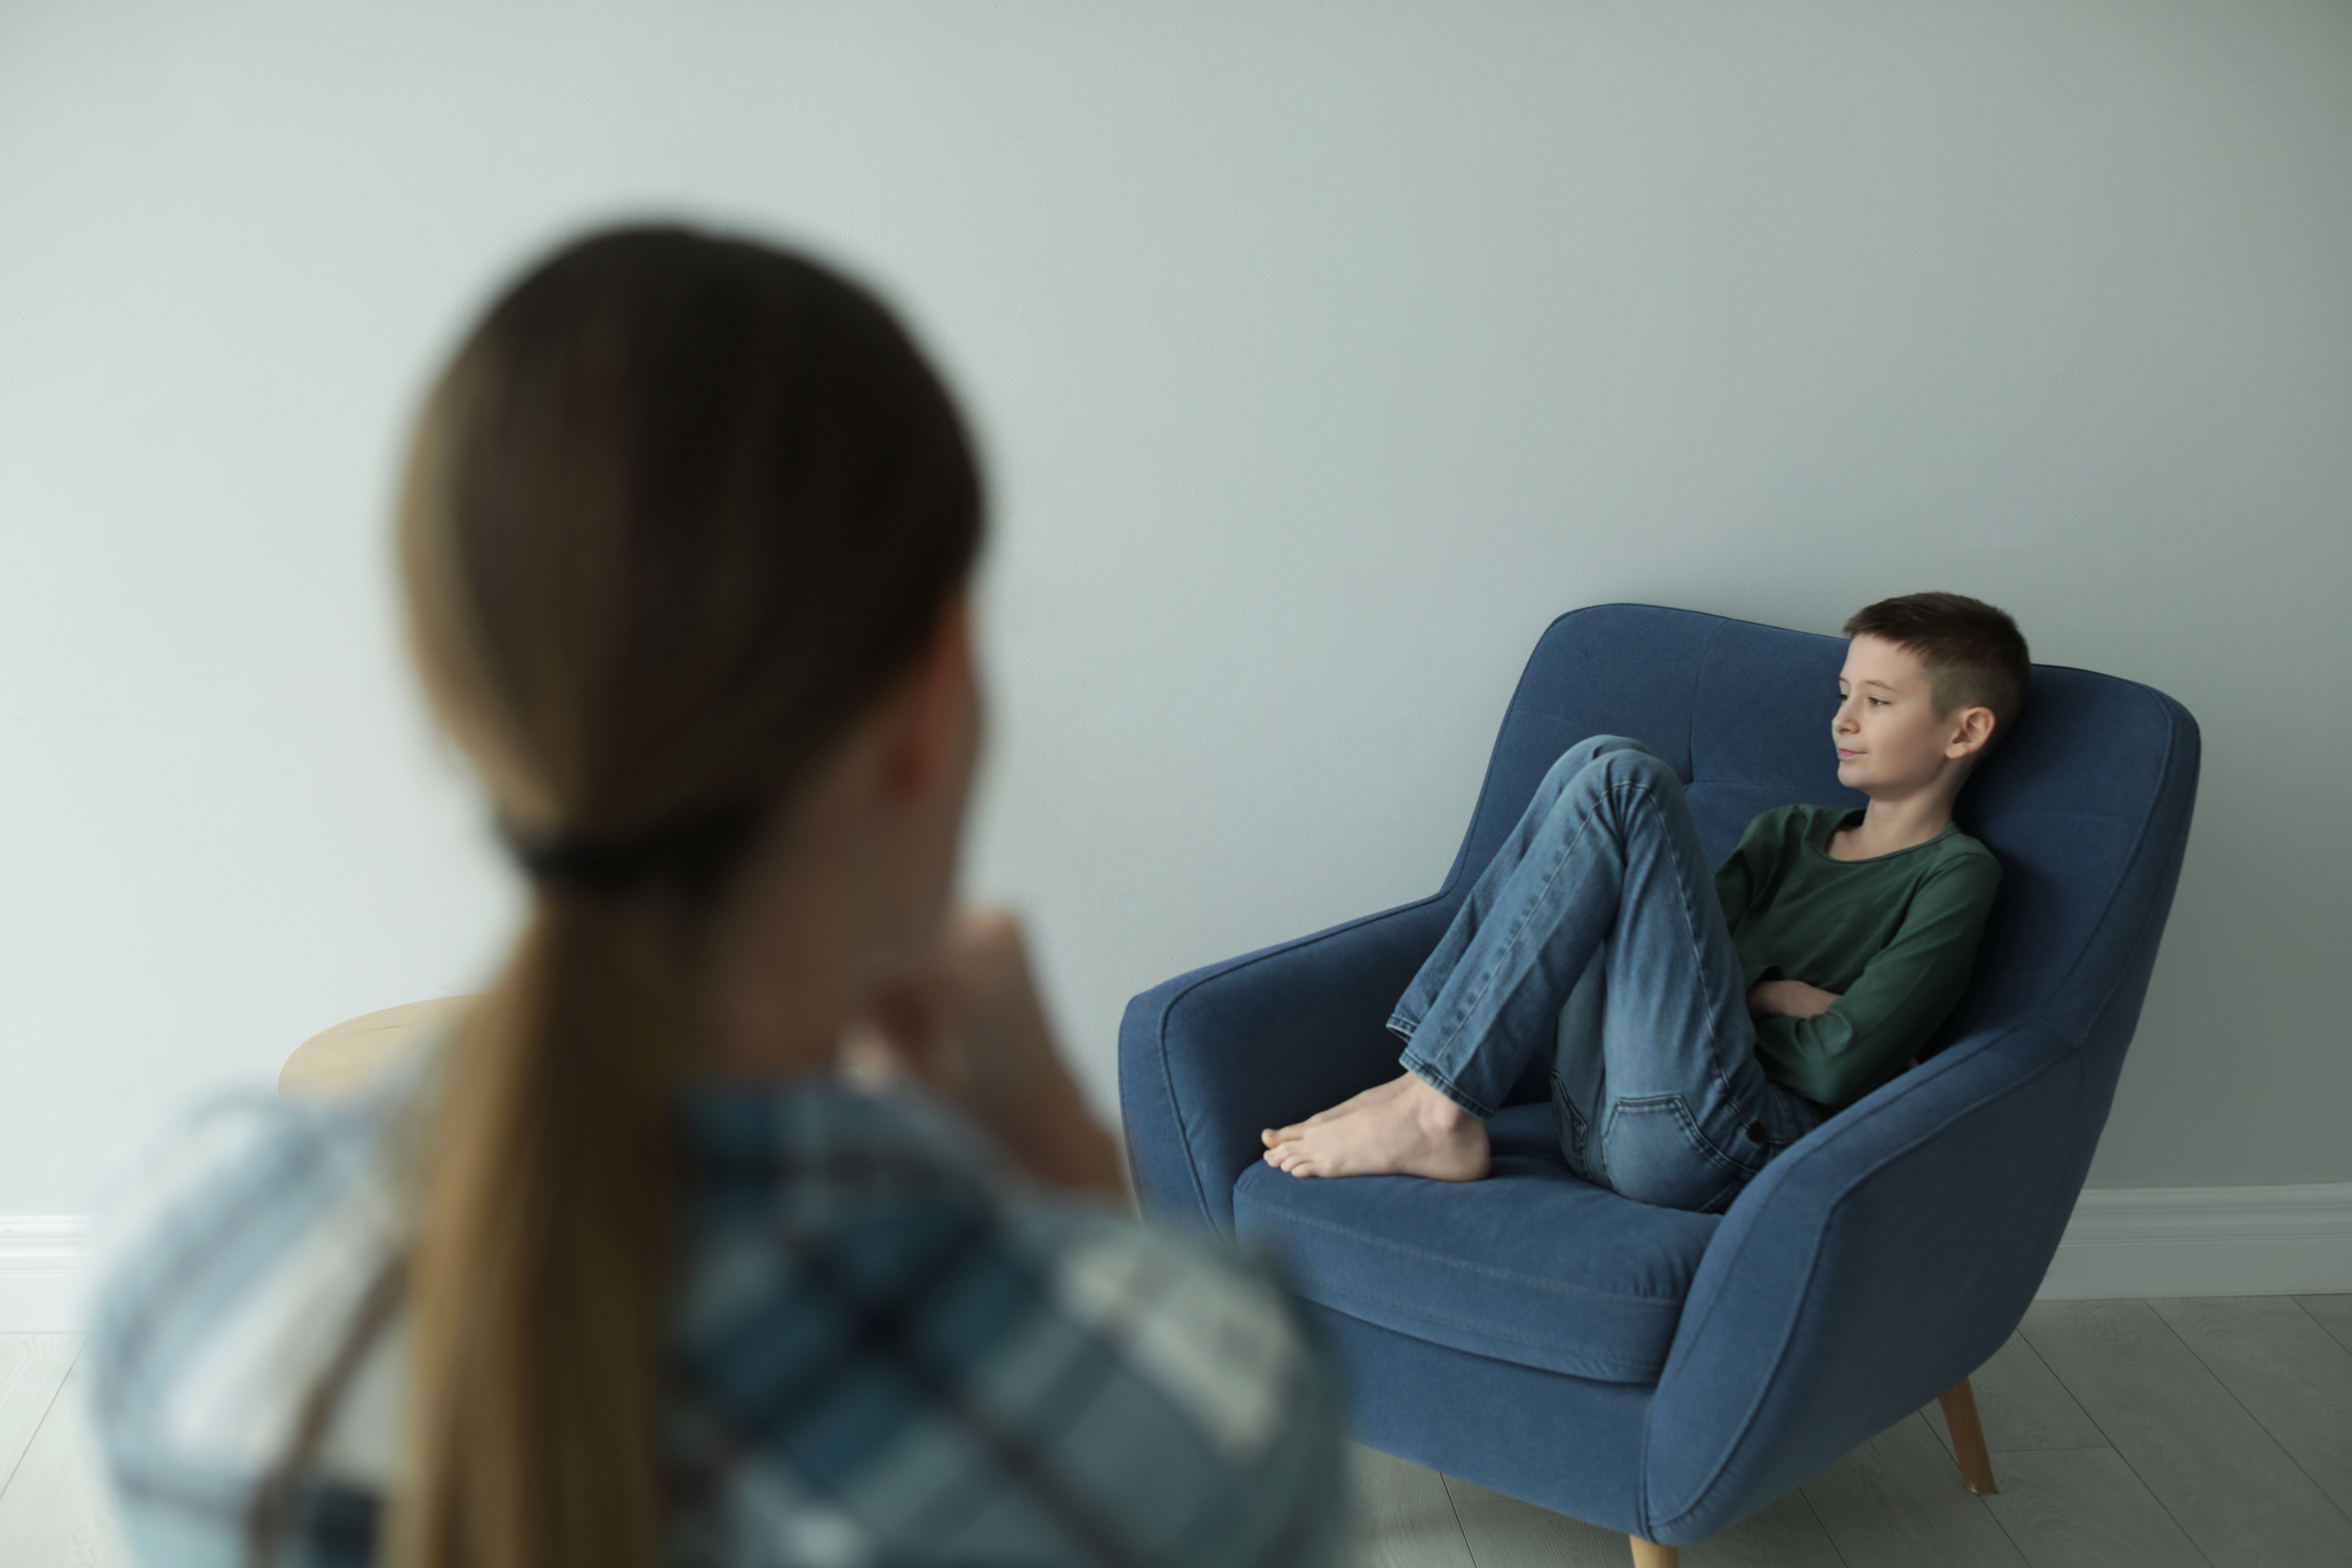 A young boy sitting on a chair as a woman looks on | Source: Shutterstock